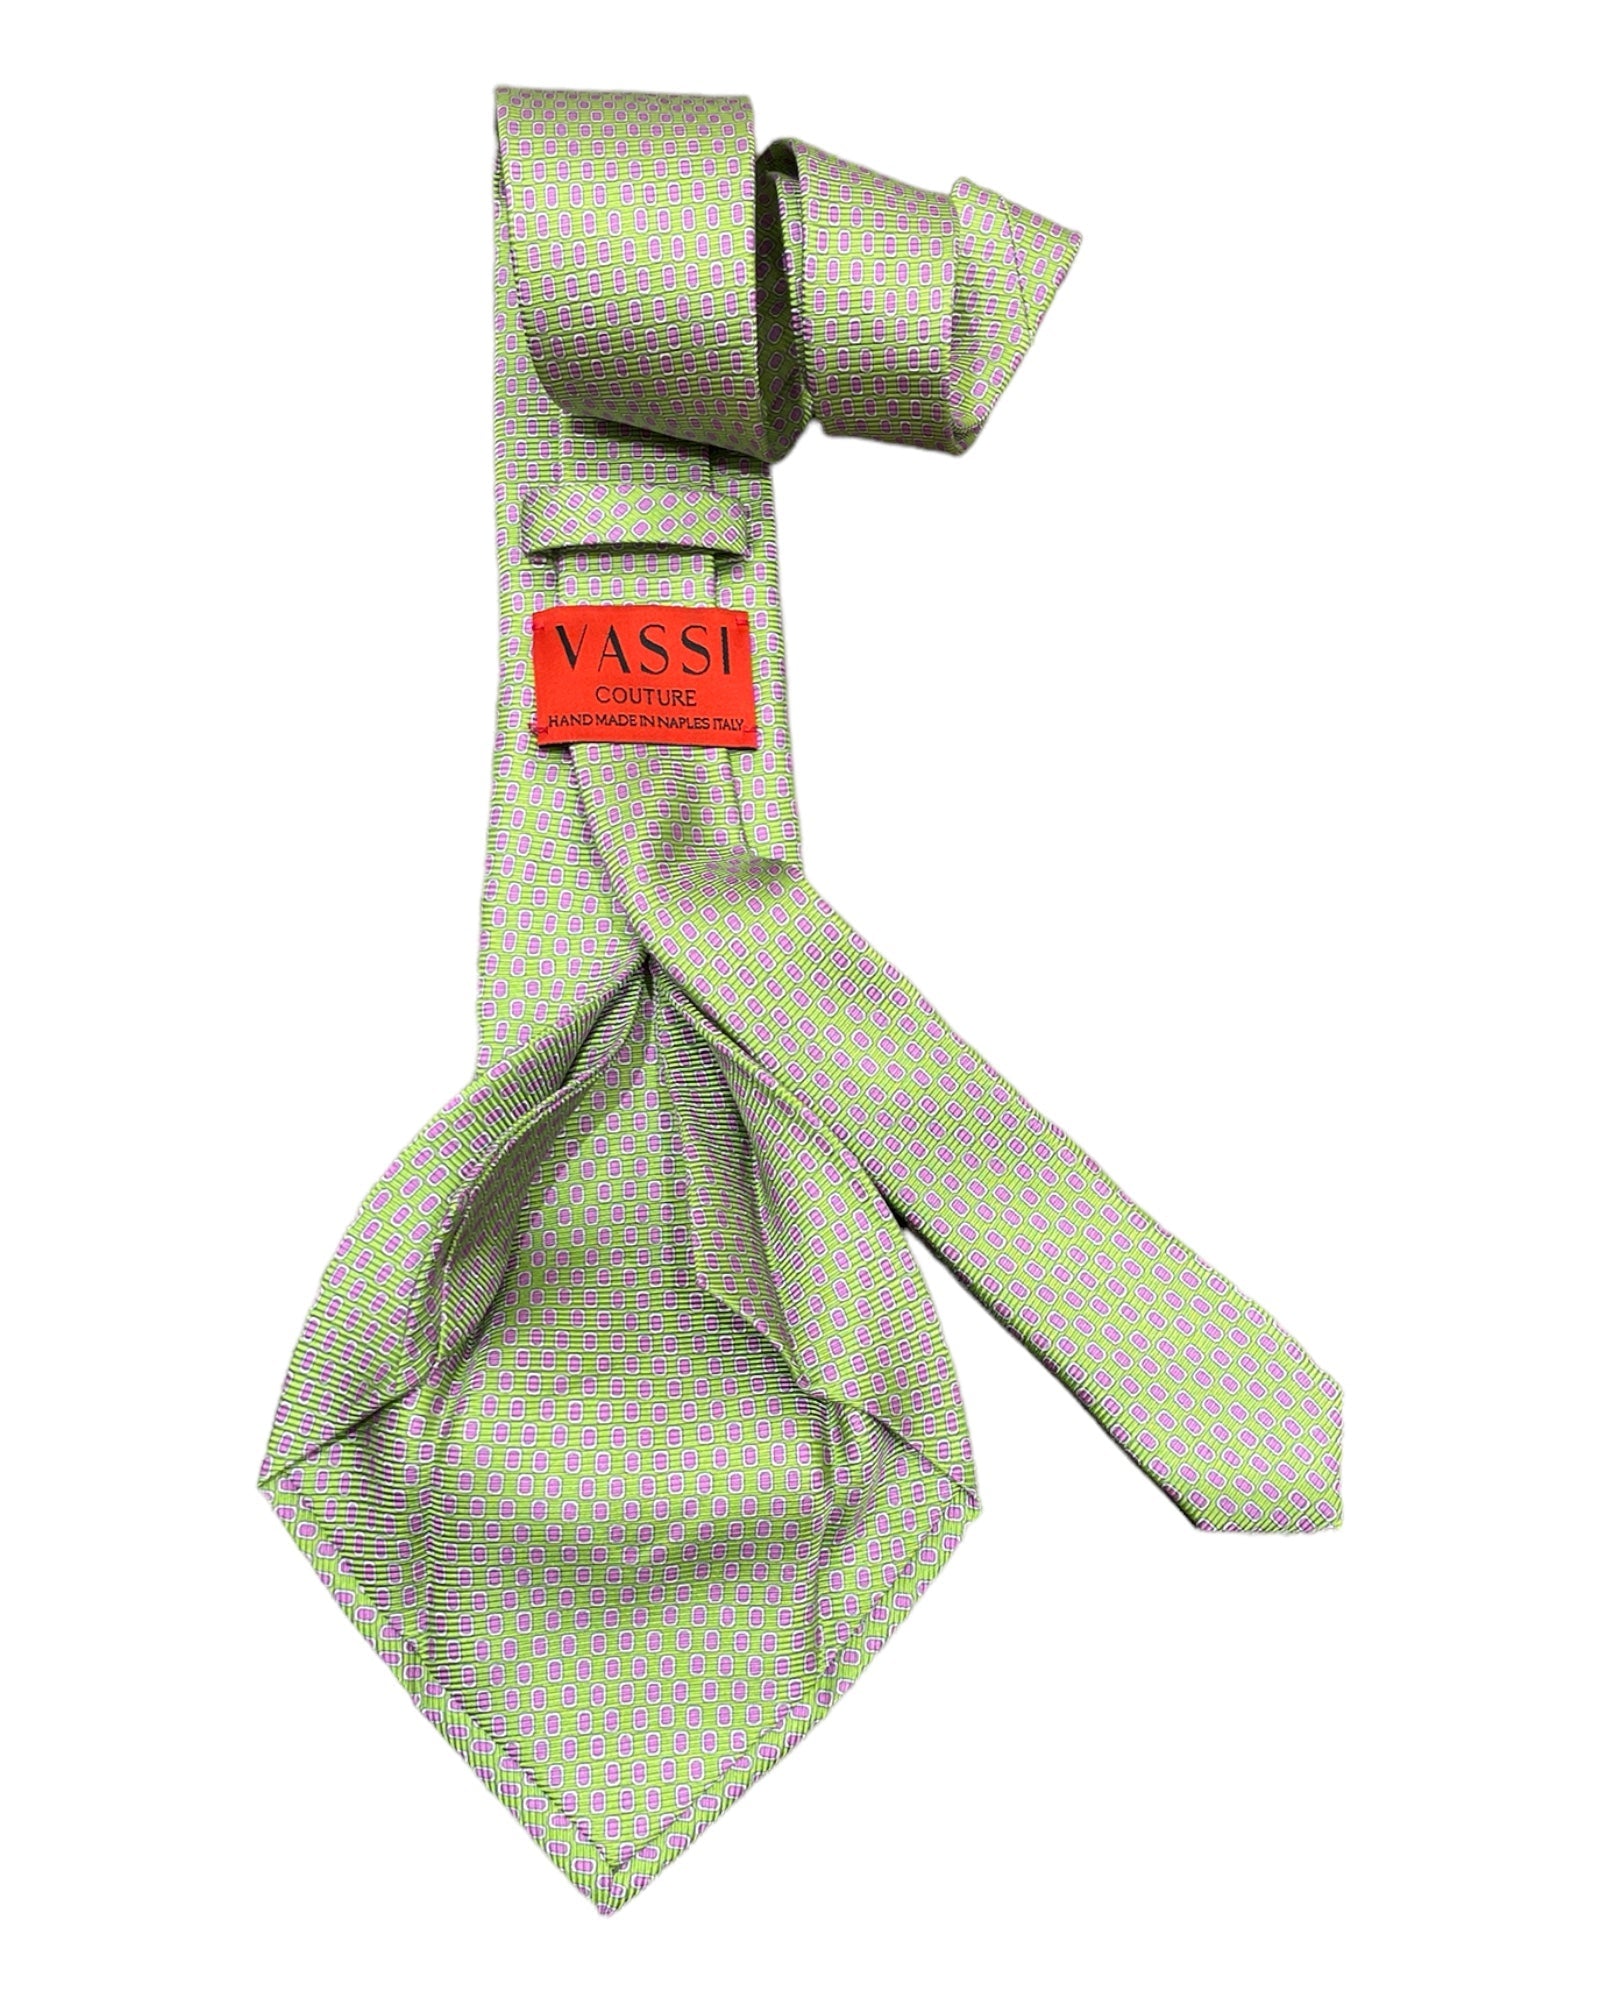 Seven-Fold Silk Tie - Green With Lavender Squares TIES